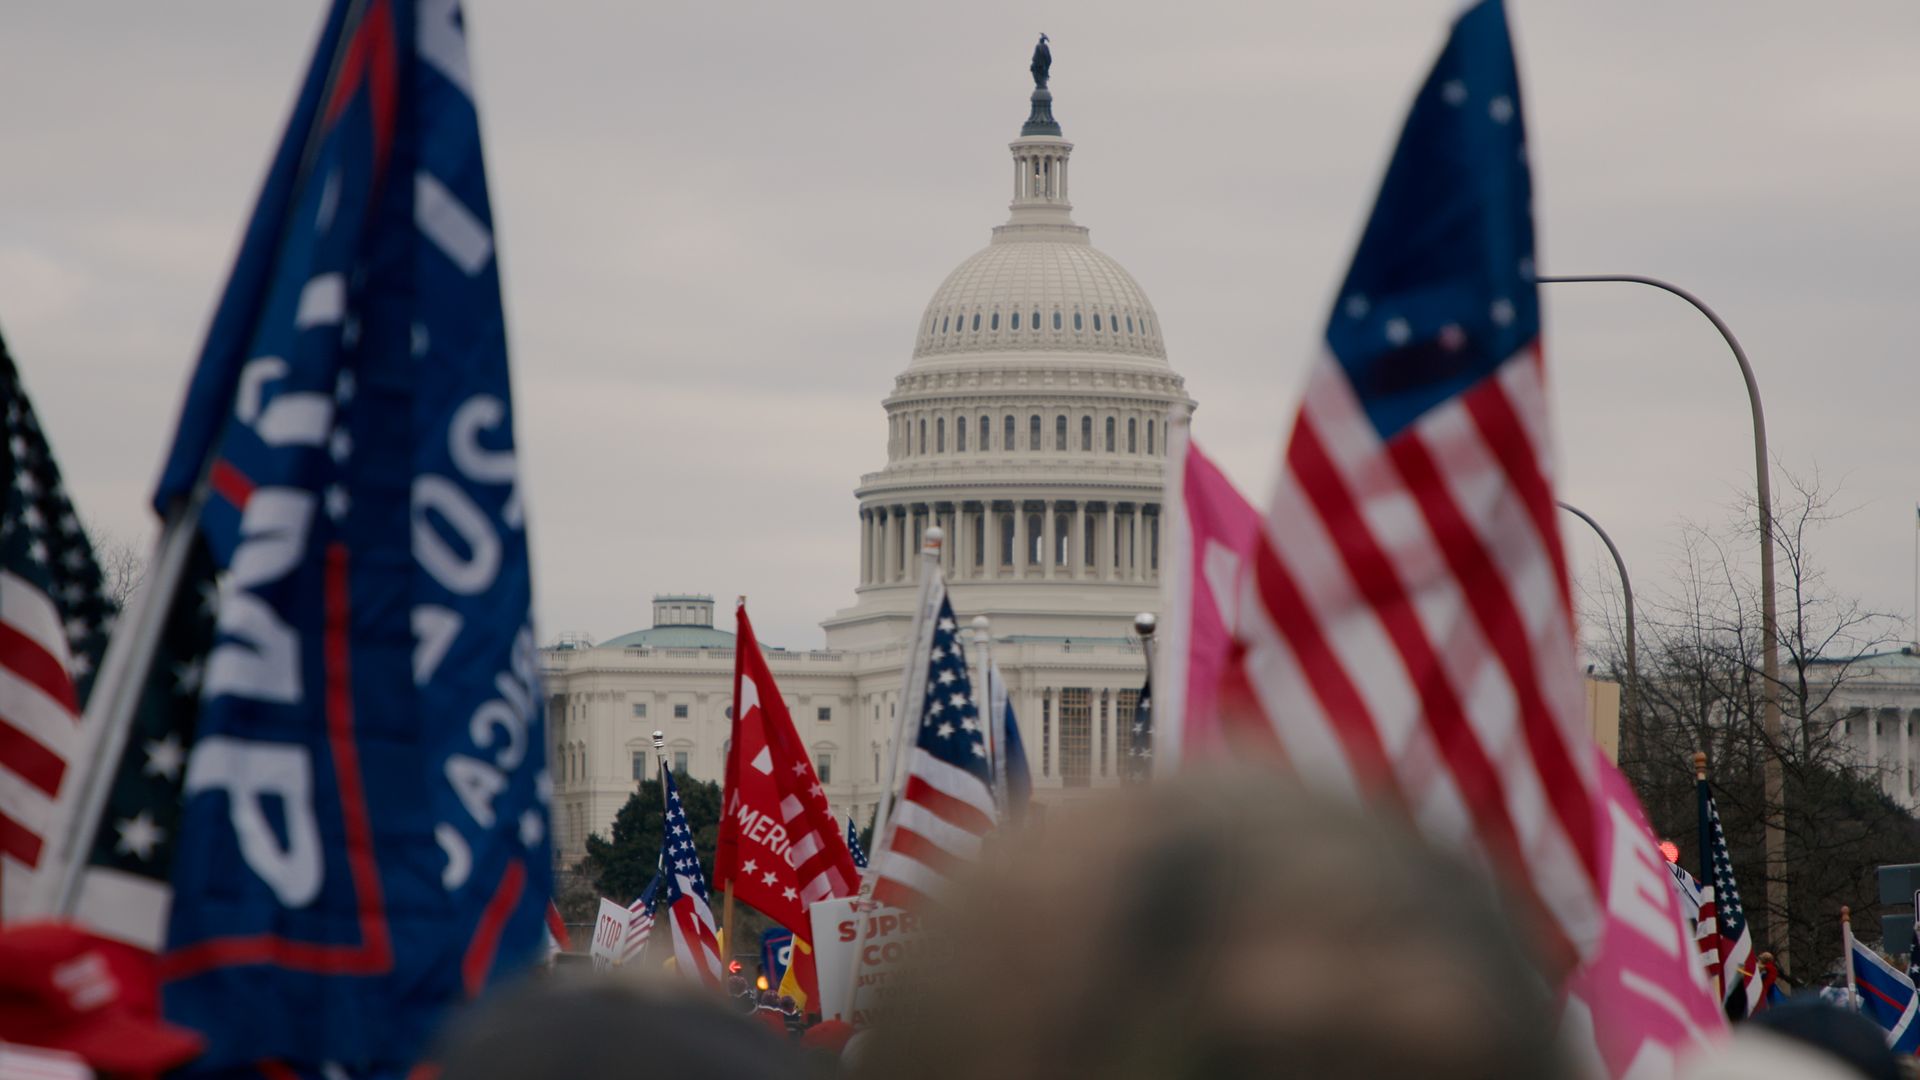 An image of people holding flags in front of the U.S. Capitol.